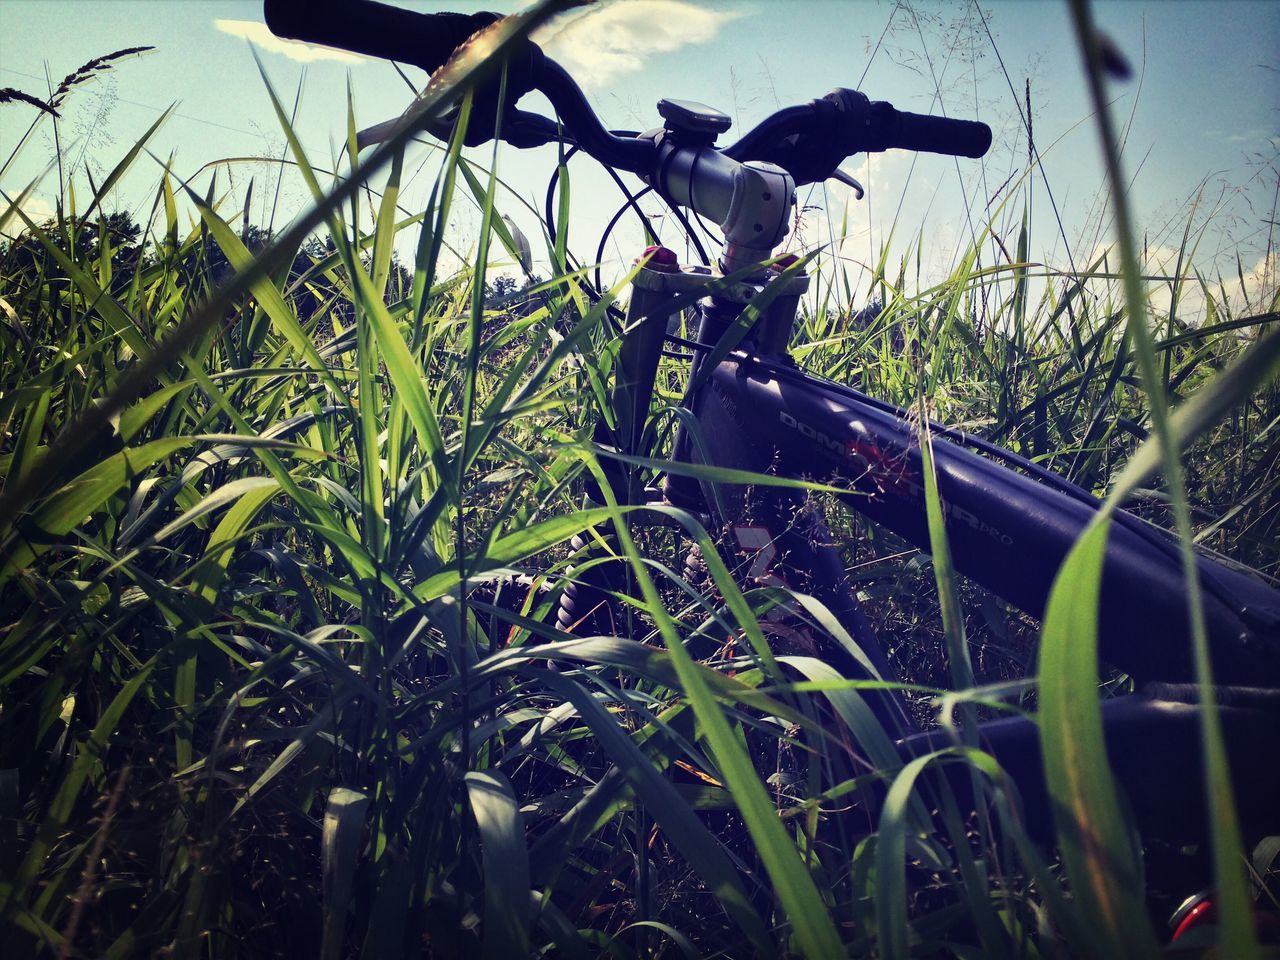 grass, field, plant, grassy, sunlight, growth, land vehicle, mode of transport, transportation, bicycle, green color, close-up, sky, outdoors, nature, day, no people, front or back yard, part of